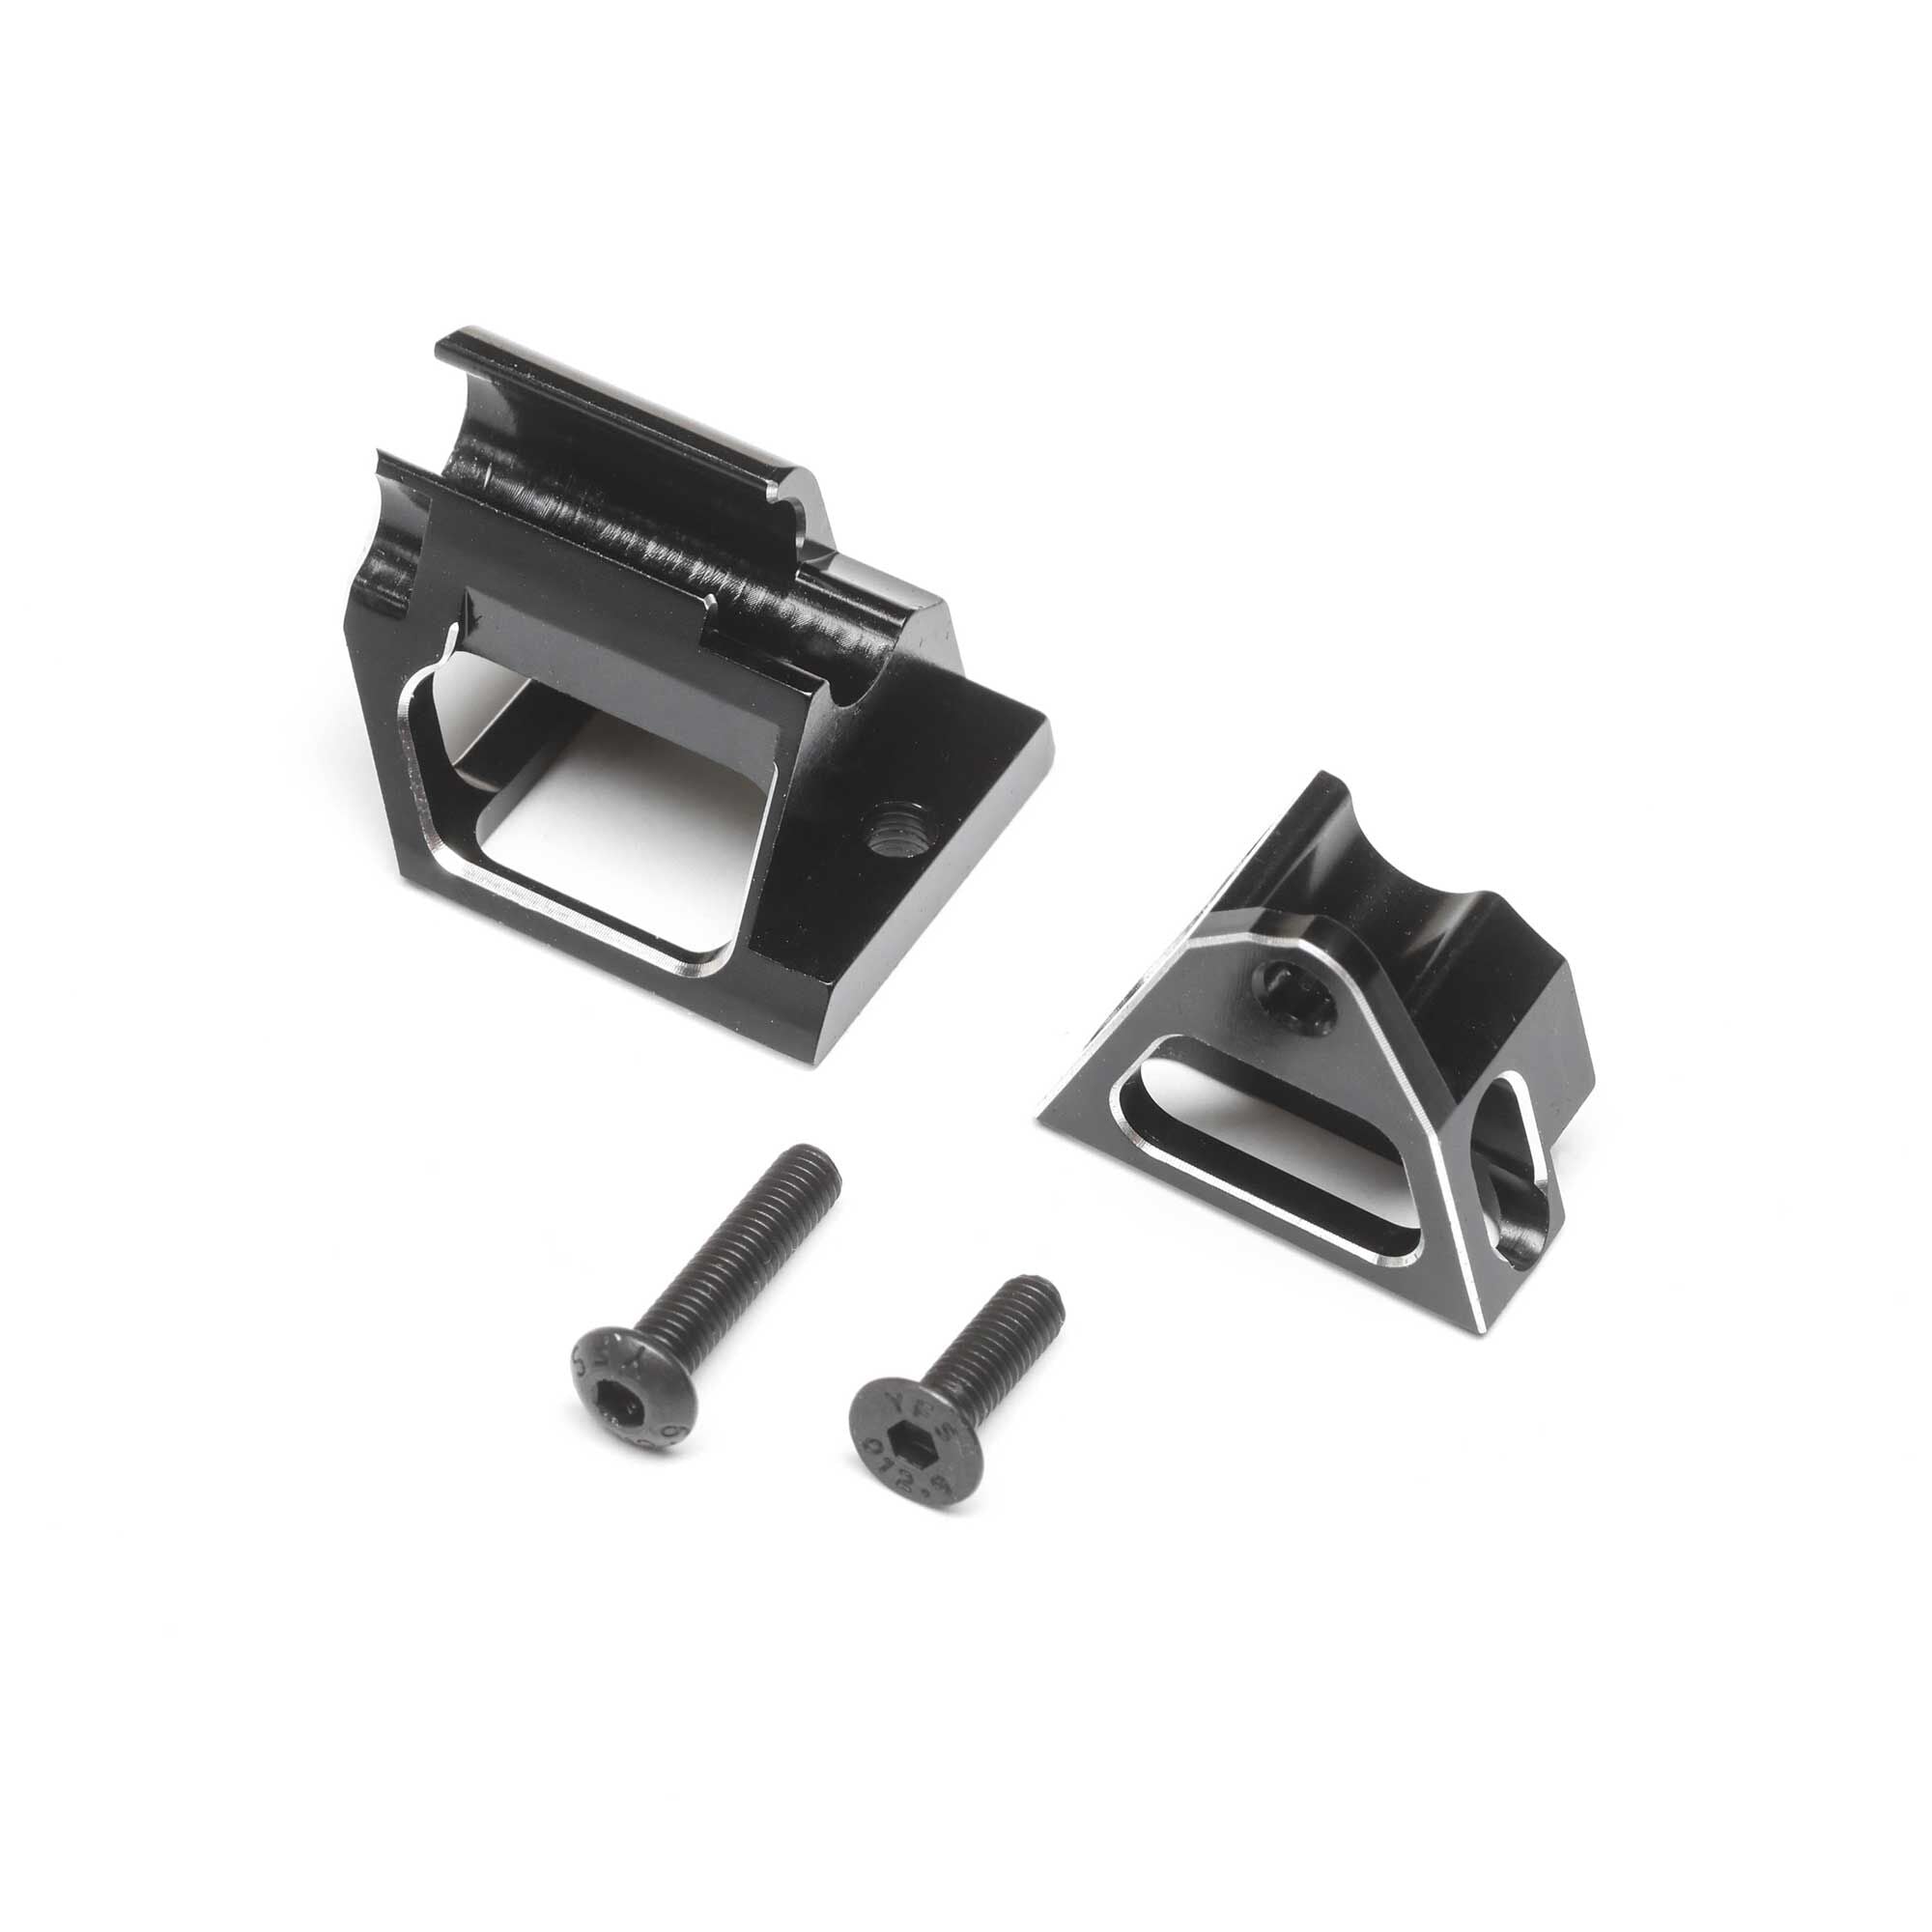 TLR Tranny to Chassis Brace, Aluminum, Laydown: 22 5.0 TLR331063